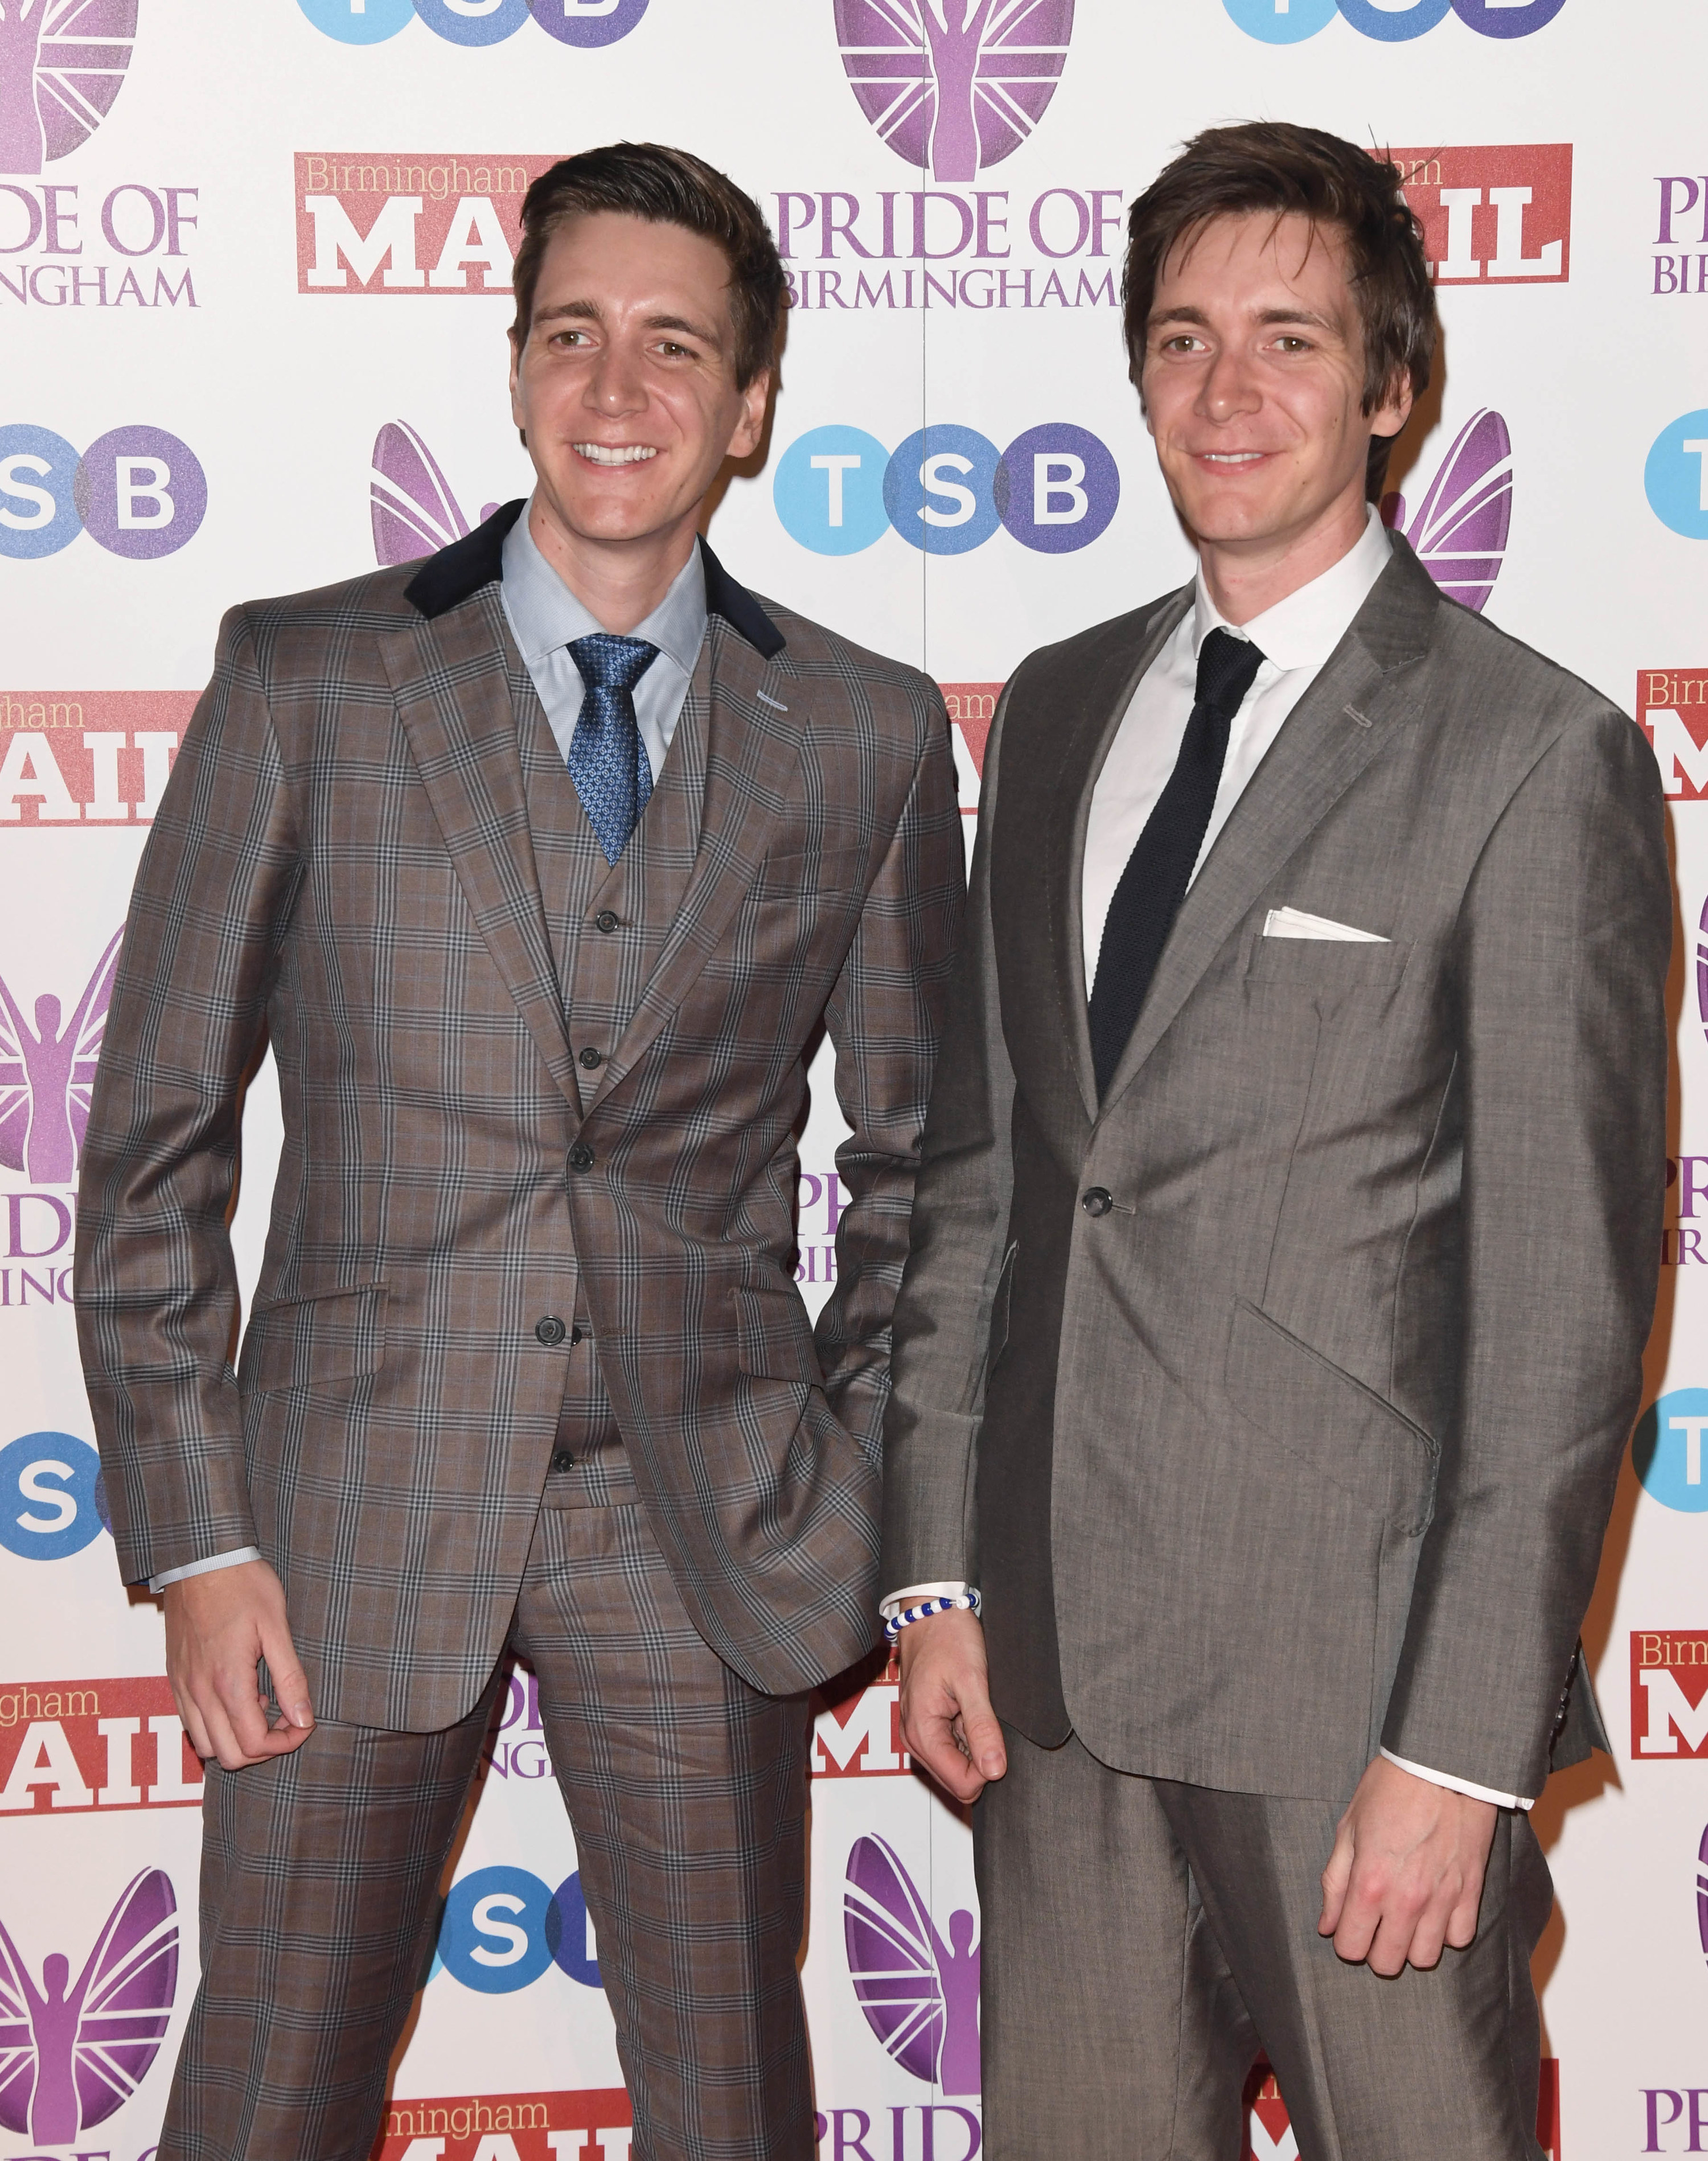 The Phelps twins smiling at a red carpet event